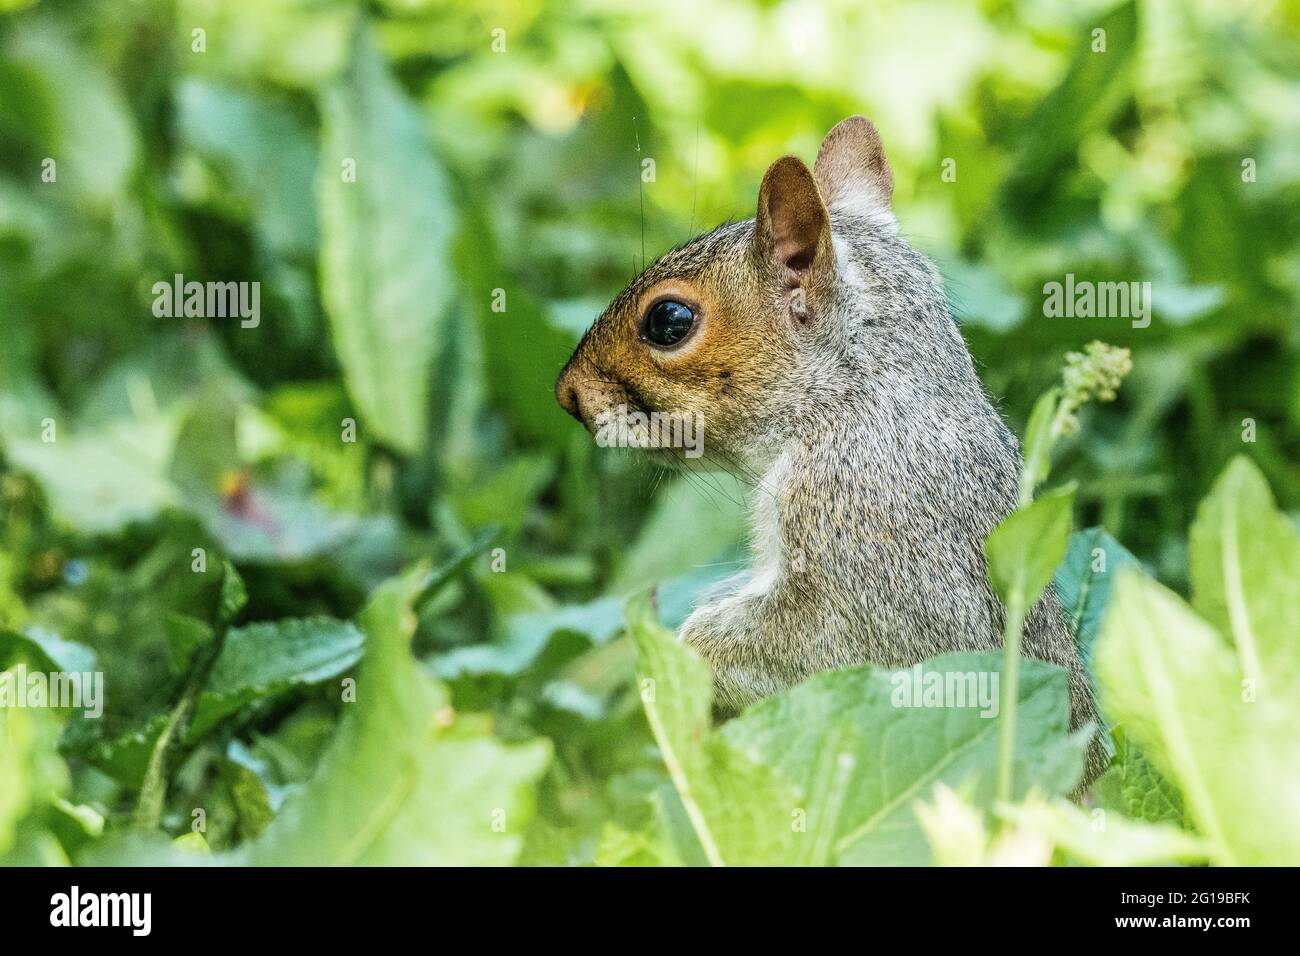 Young squirrel hiding in undergrowth Stock Photo